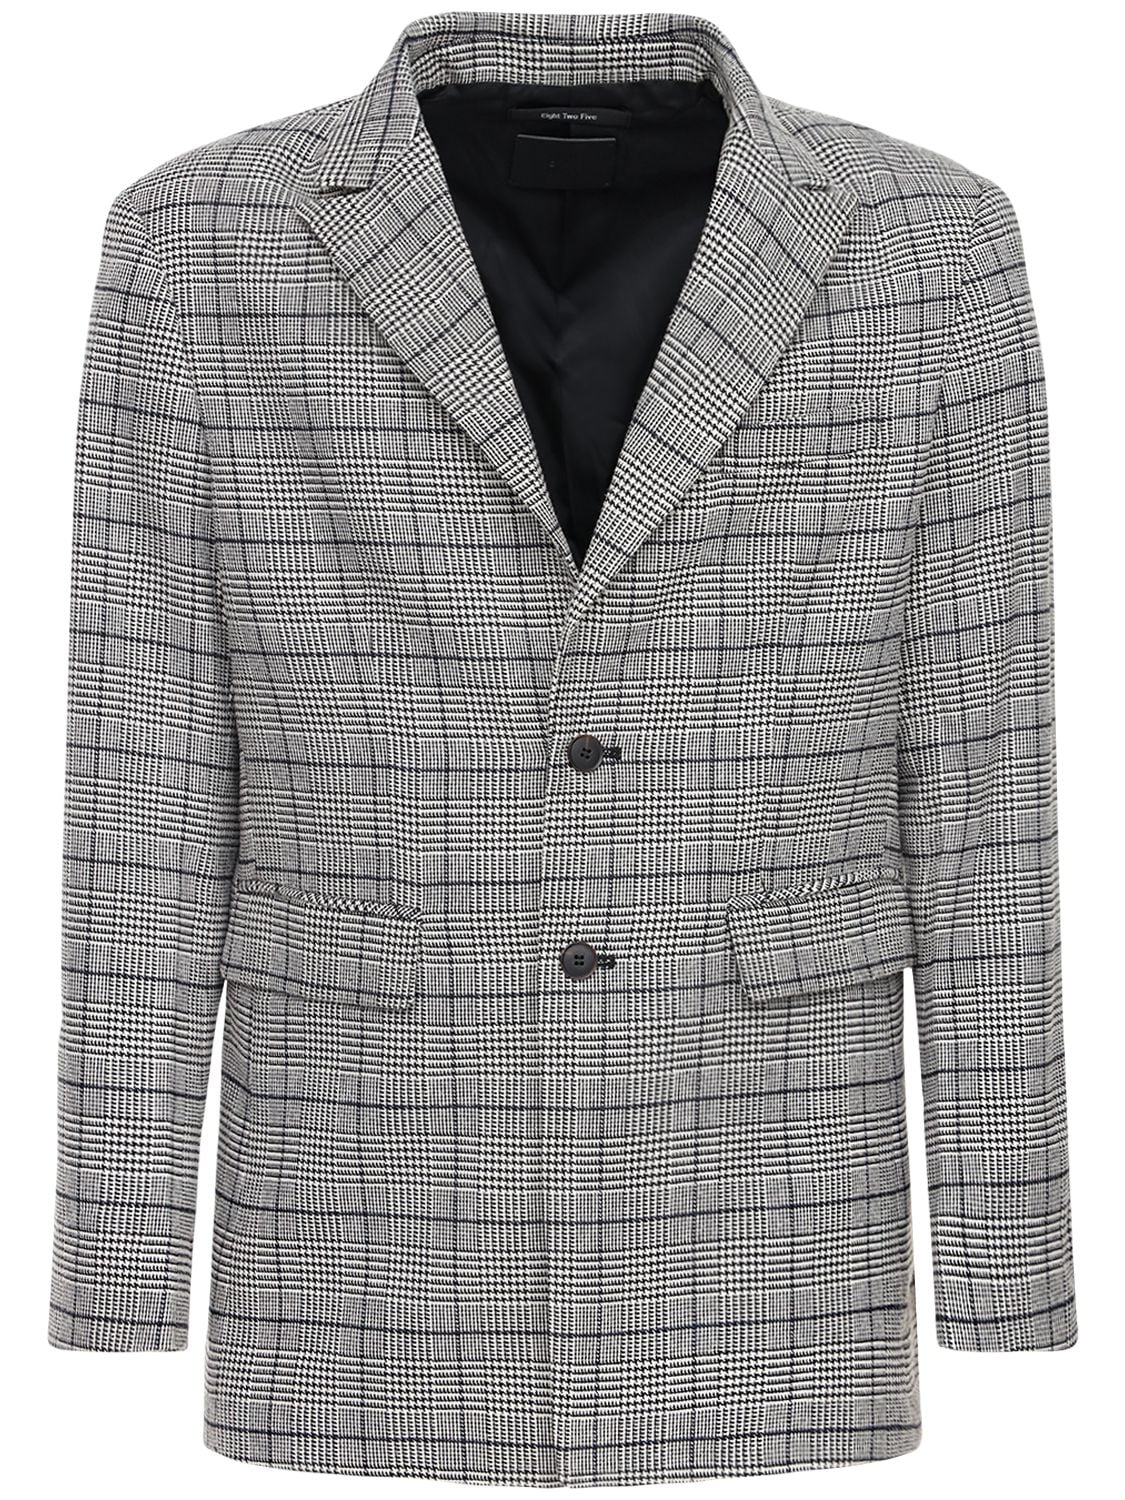 825 Prince Of Wales Single Breasted Jacket In Multicolor